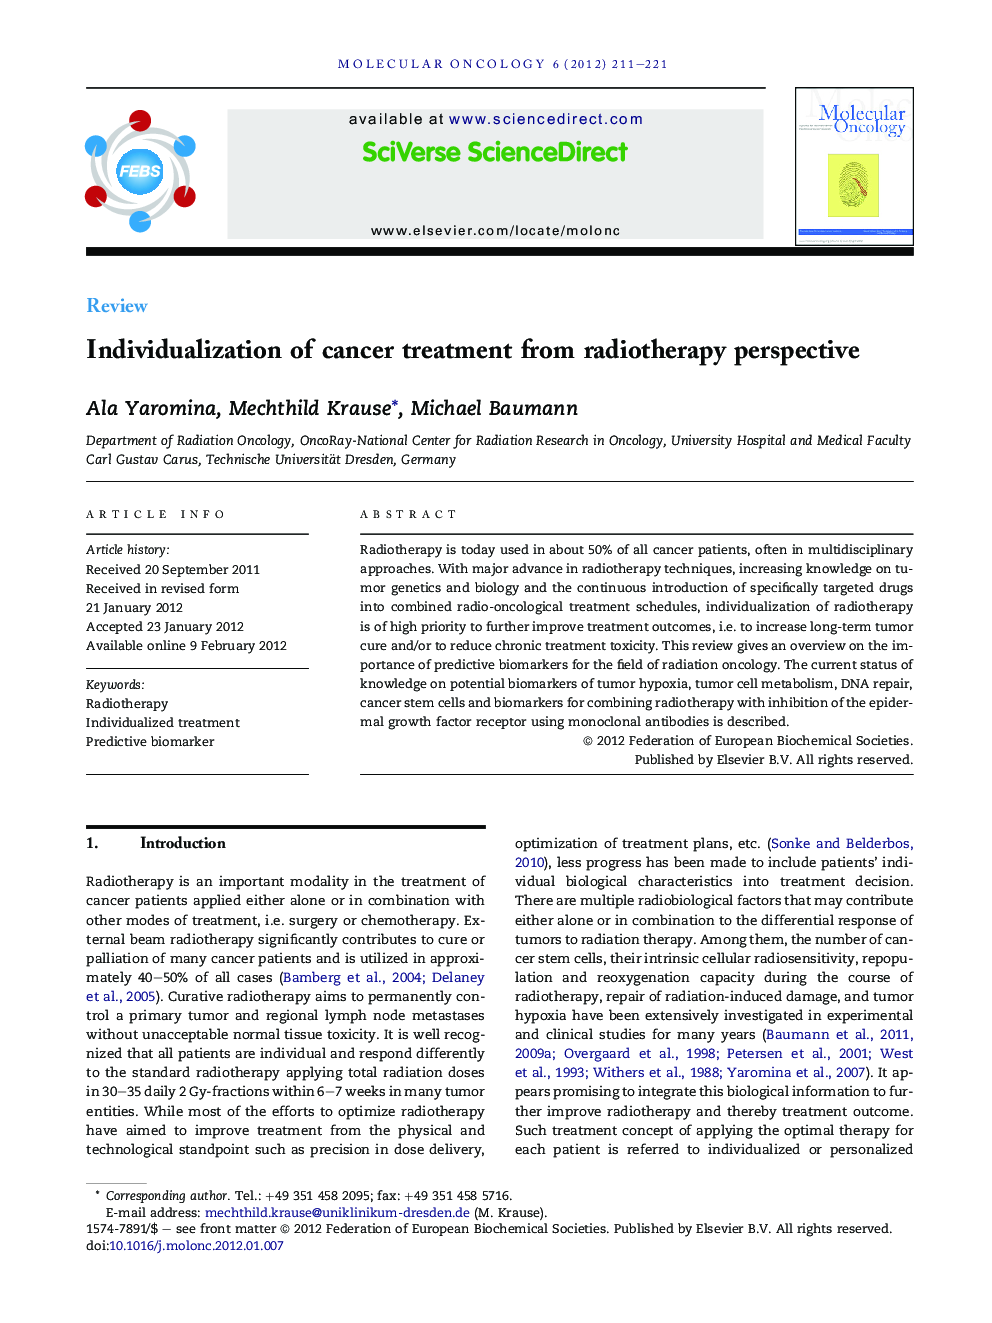 Individualization of cancer treatment from radiotherapy perspective